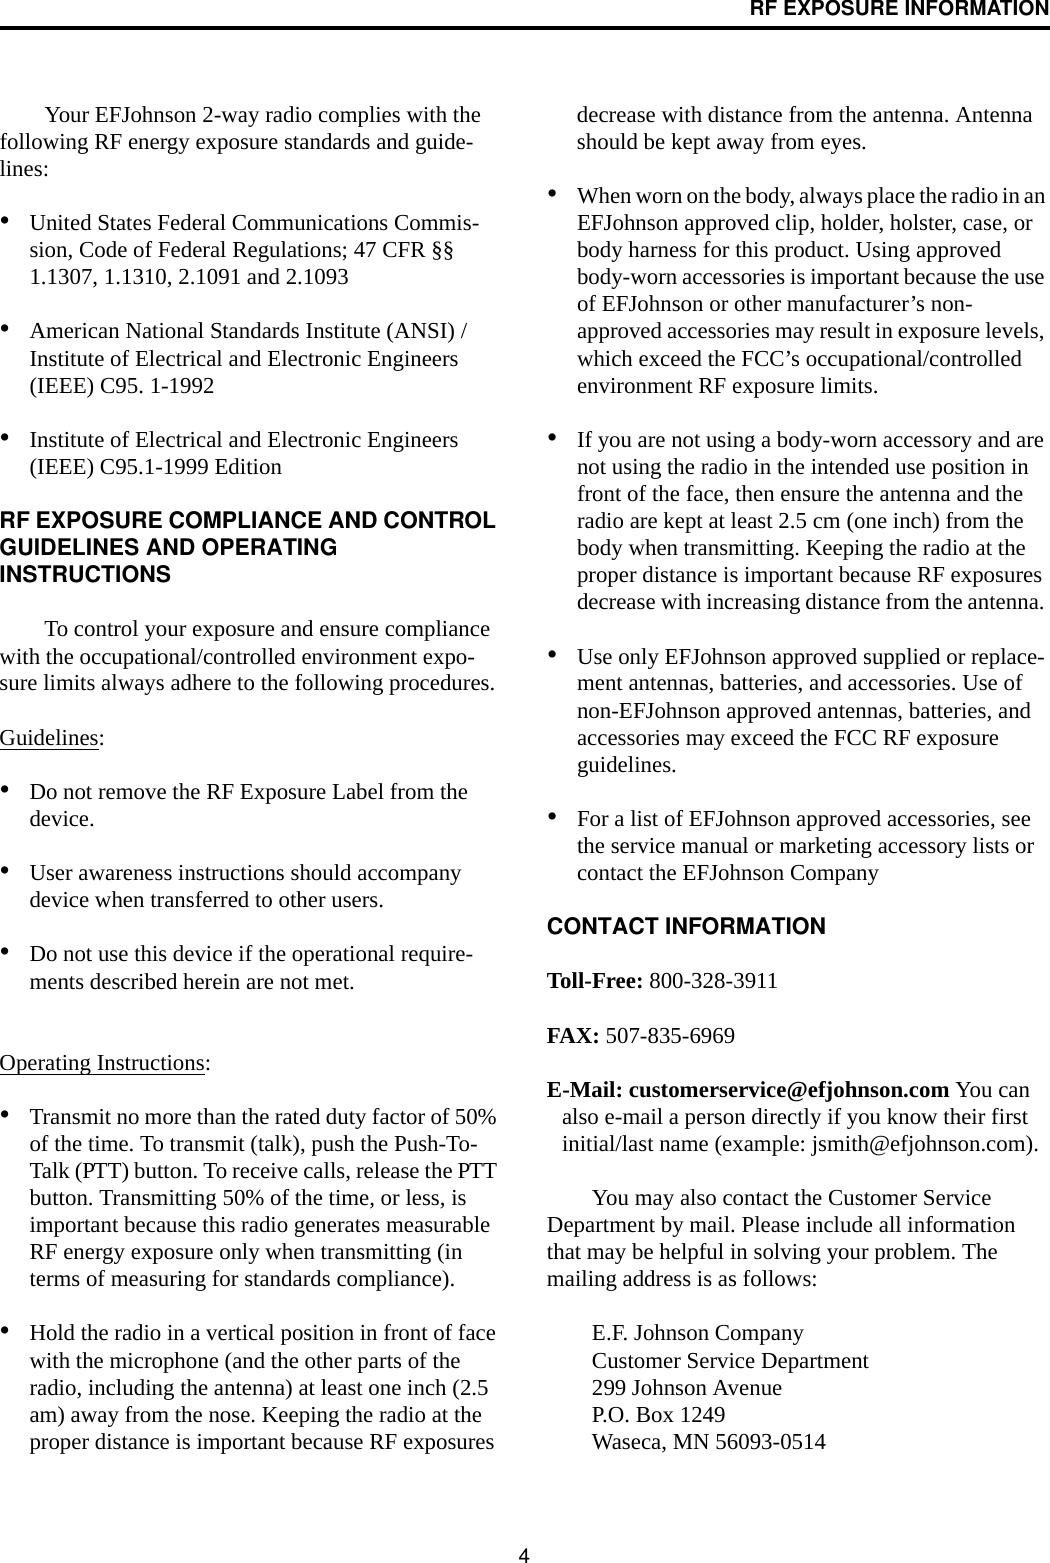 4RF EXPOSURE INFORMATIONYour EFJohnson 2-way radio complies with the following RF energy exposure standards and guide-lines:•United States Federal Communications Commis-sion, Code of Federal Regulations; 47 CFR §§ 1.1307, 1.1310, 2.1091 and 2.1093 •American National Standards Institute (ANSI) / Institute of Electrical and Electronic Engineers (IEEE) C95. 1-1992 •Institute of Electrical and Electronic Engineers (IEEE) C95.1-1999 Edition RF EXPOSURE COMPLIANCE AND CONTROL GUIDELINES AND OPERATING INSTRUCTIONSTo control your exposure and ensure compliance with the occupational/controlled environment expo-sure limits always adhere to the following procedures.Guidelines:•Do not remove the RF Exposure Label from the device. •User awareness instructions should accompany device when transferred to other users. •Do not use this device if the operational require-ments described herein are not met. Operating Instructions: •Transmit no more than the rated duty factor of 50% of the time. To transmit (talk), push the Push-To-Talk (PTT) button. To receive calls, release the PTT button. Transmitting 50% of the time, or less, is important because this radio generates measurable RF energy exposure only when transmitting (in terms of measuring for standards compliance).•Hold the radio in a vertical position in front of face with the microphone (and the other parts of the radio, including the antenna) at least one inch (2.5 am) away from the nose. Keeping the radio at the proper distance is important because RF exposures decrease with distance from the antenna. Antenna should be kept away from eyes. •When worn on the body, always place the radio in an EFJohnson approved clip, holder, holster, case, or body harness for this product. Using approved body-worn accessories is important because the use of EFJohnson or other manufacturer’s non-approved accessories may result in exposure levels, which exceed the FCC’s occupational/controlled environment RF exposure limits. •If you are not using a body-worn accessory and are not using the radio in the intended use position in front of the face, then ensure the antenna and the radio are kept at least 2.5 cm (one inch) from the body when transmitting. Keeping the radio at the proper distance is important because RF exposures decrease with increasing distance from the antenna. •Use only EFJohnson approved supplied or replace-ment antennas, batteries, and accessories. Use of non-EFJohnson approved antennas, batteries, and accessories may exceed the FCC RF exposure guidelines. •For a list of EFJohnson approved accessories, see the service manual or marketing accessory lists or contact the EFJohnson Company CONTACT INFORMATIONToll-Free: 800-328-3911FAX: 507-835-6969E-Mail: customerservice@efjohnson.com You can also e-mail a person directly if you know their first initial/last name (example: jsmith@efjohnson.com).You may also contact the Customer Service Department by mail. Please include all information that may be helpful in solving your problem. The mailing address is as follows: E.F. Johnson CompanyCustomer Service Department 299 Johnson Avenue P.O. Box 1249 Waseca, MN 56093-0514 